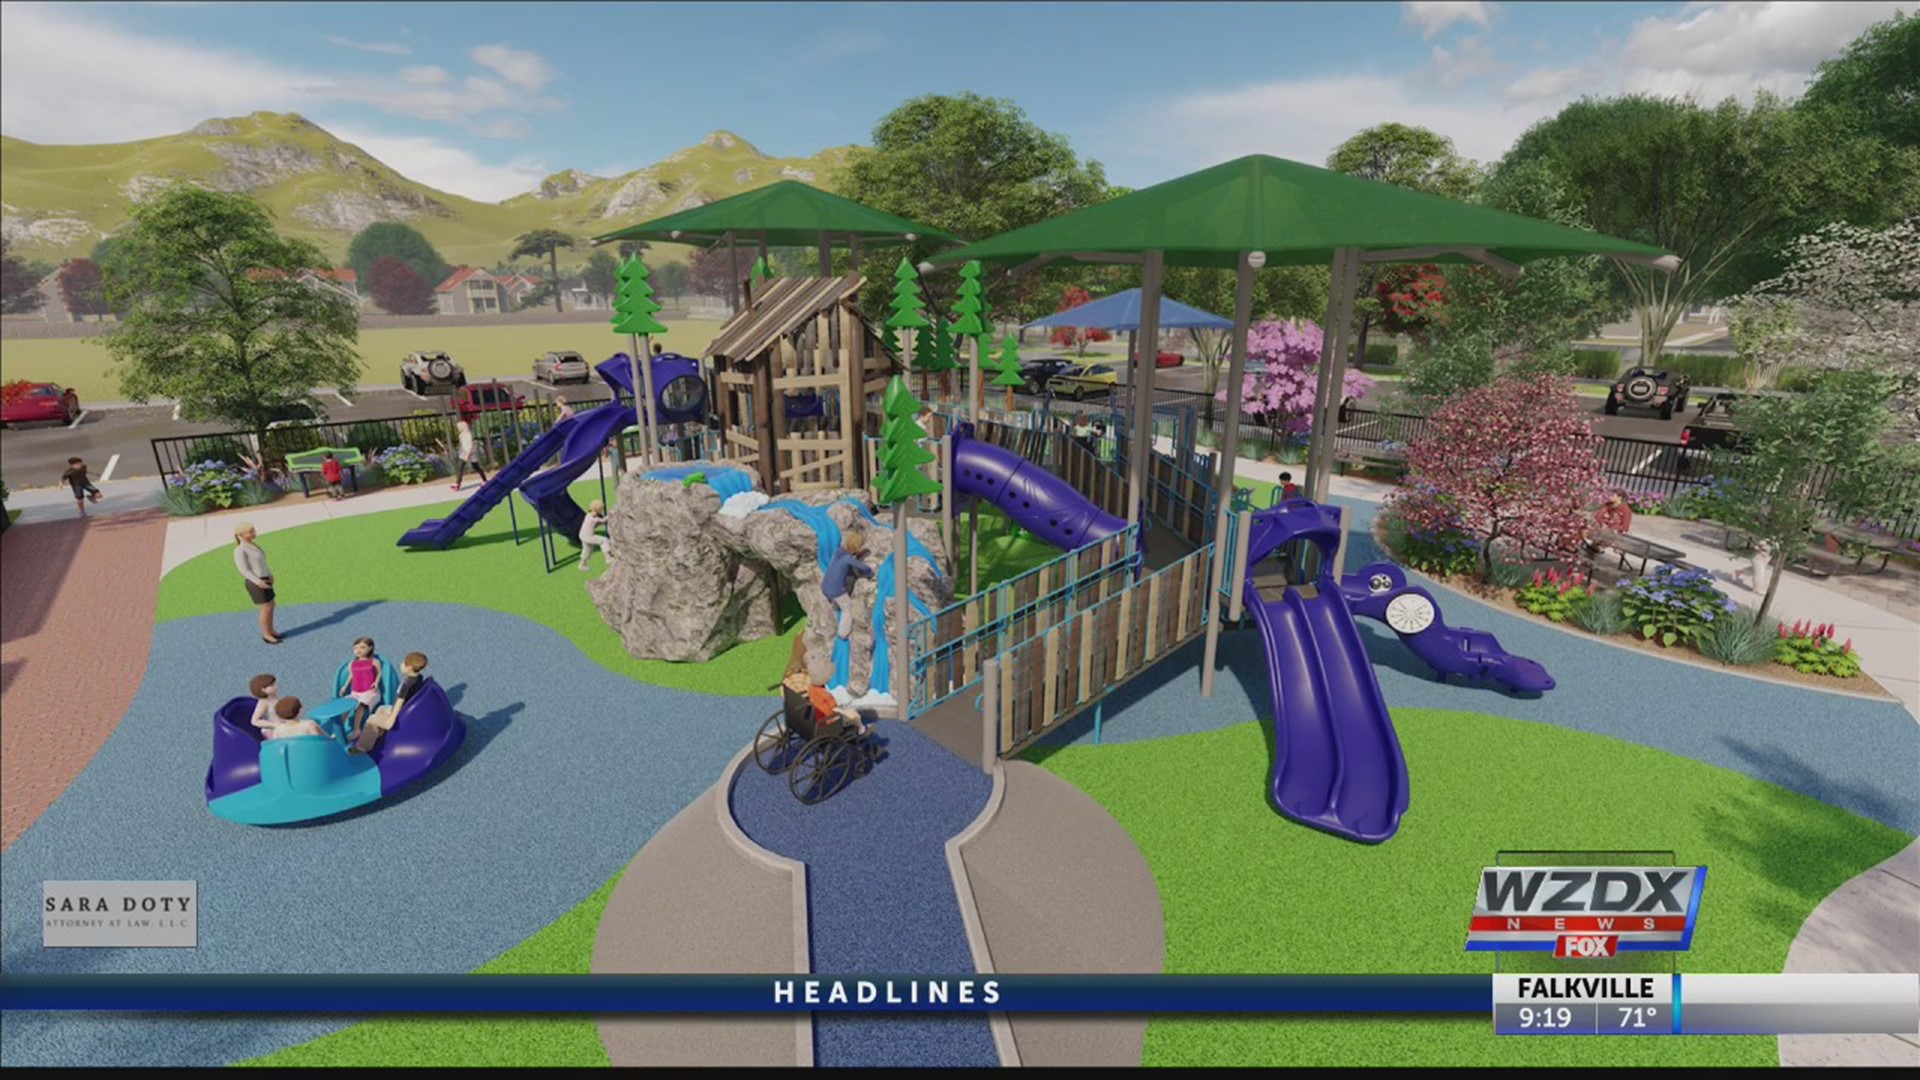 A local group is fighting hard to make sure all kids have a safe place to play.